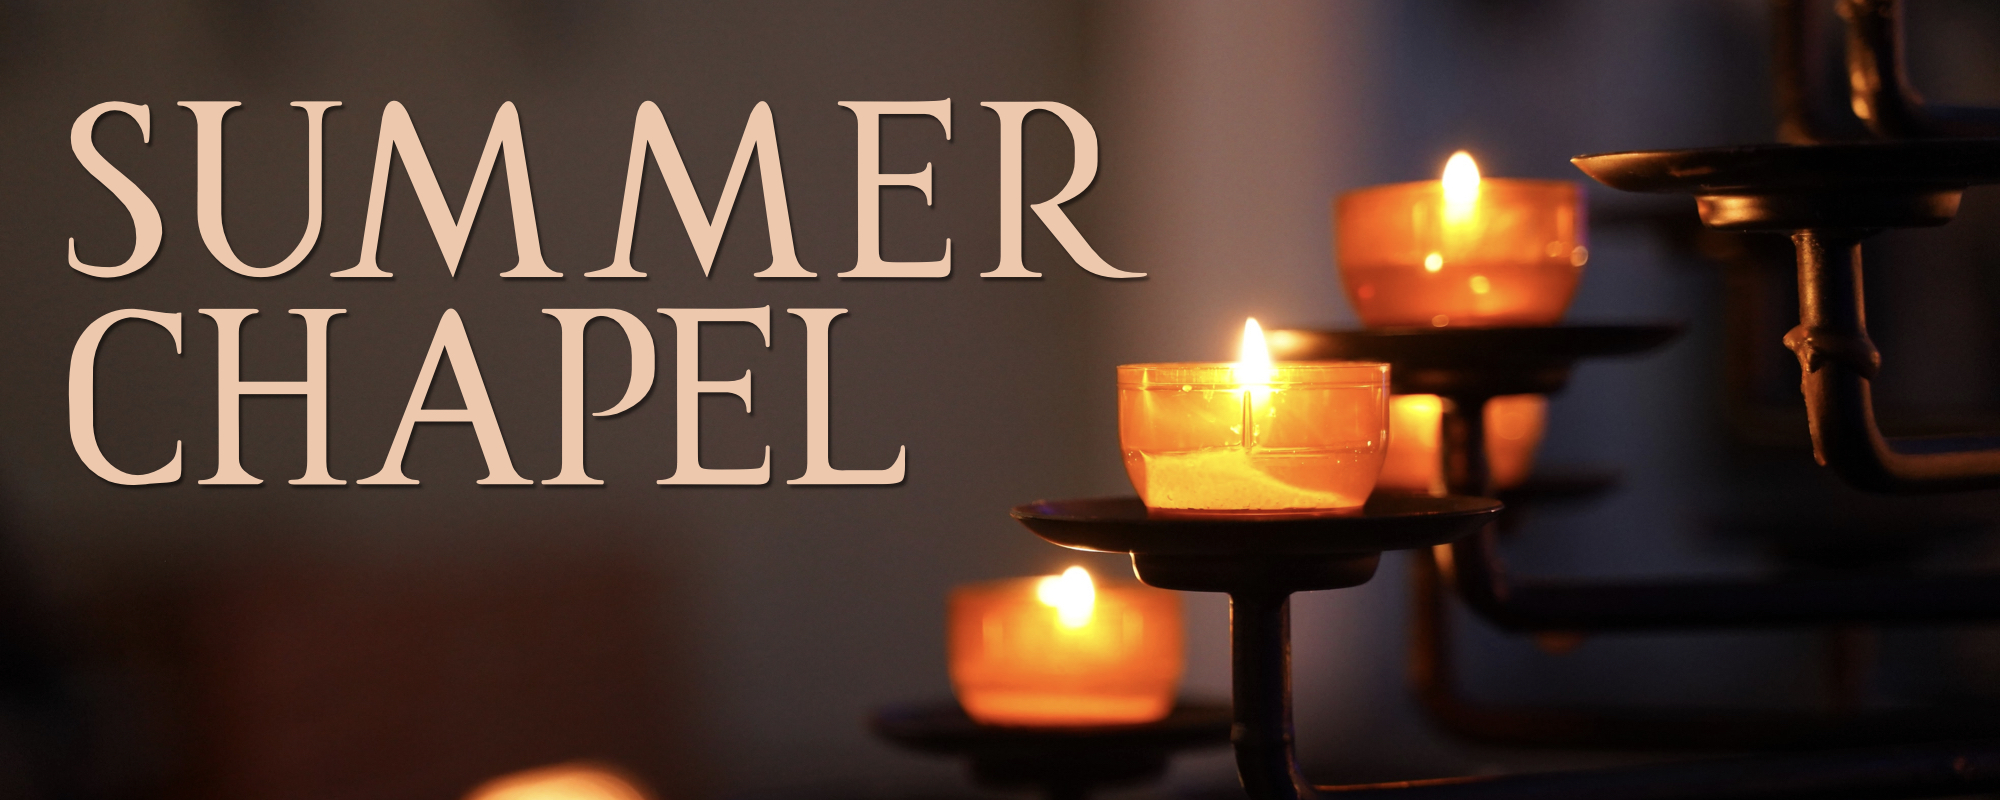 Summer Chapel Order of Worship for July 23rd